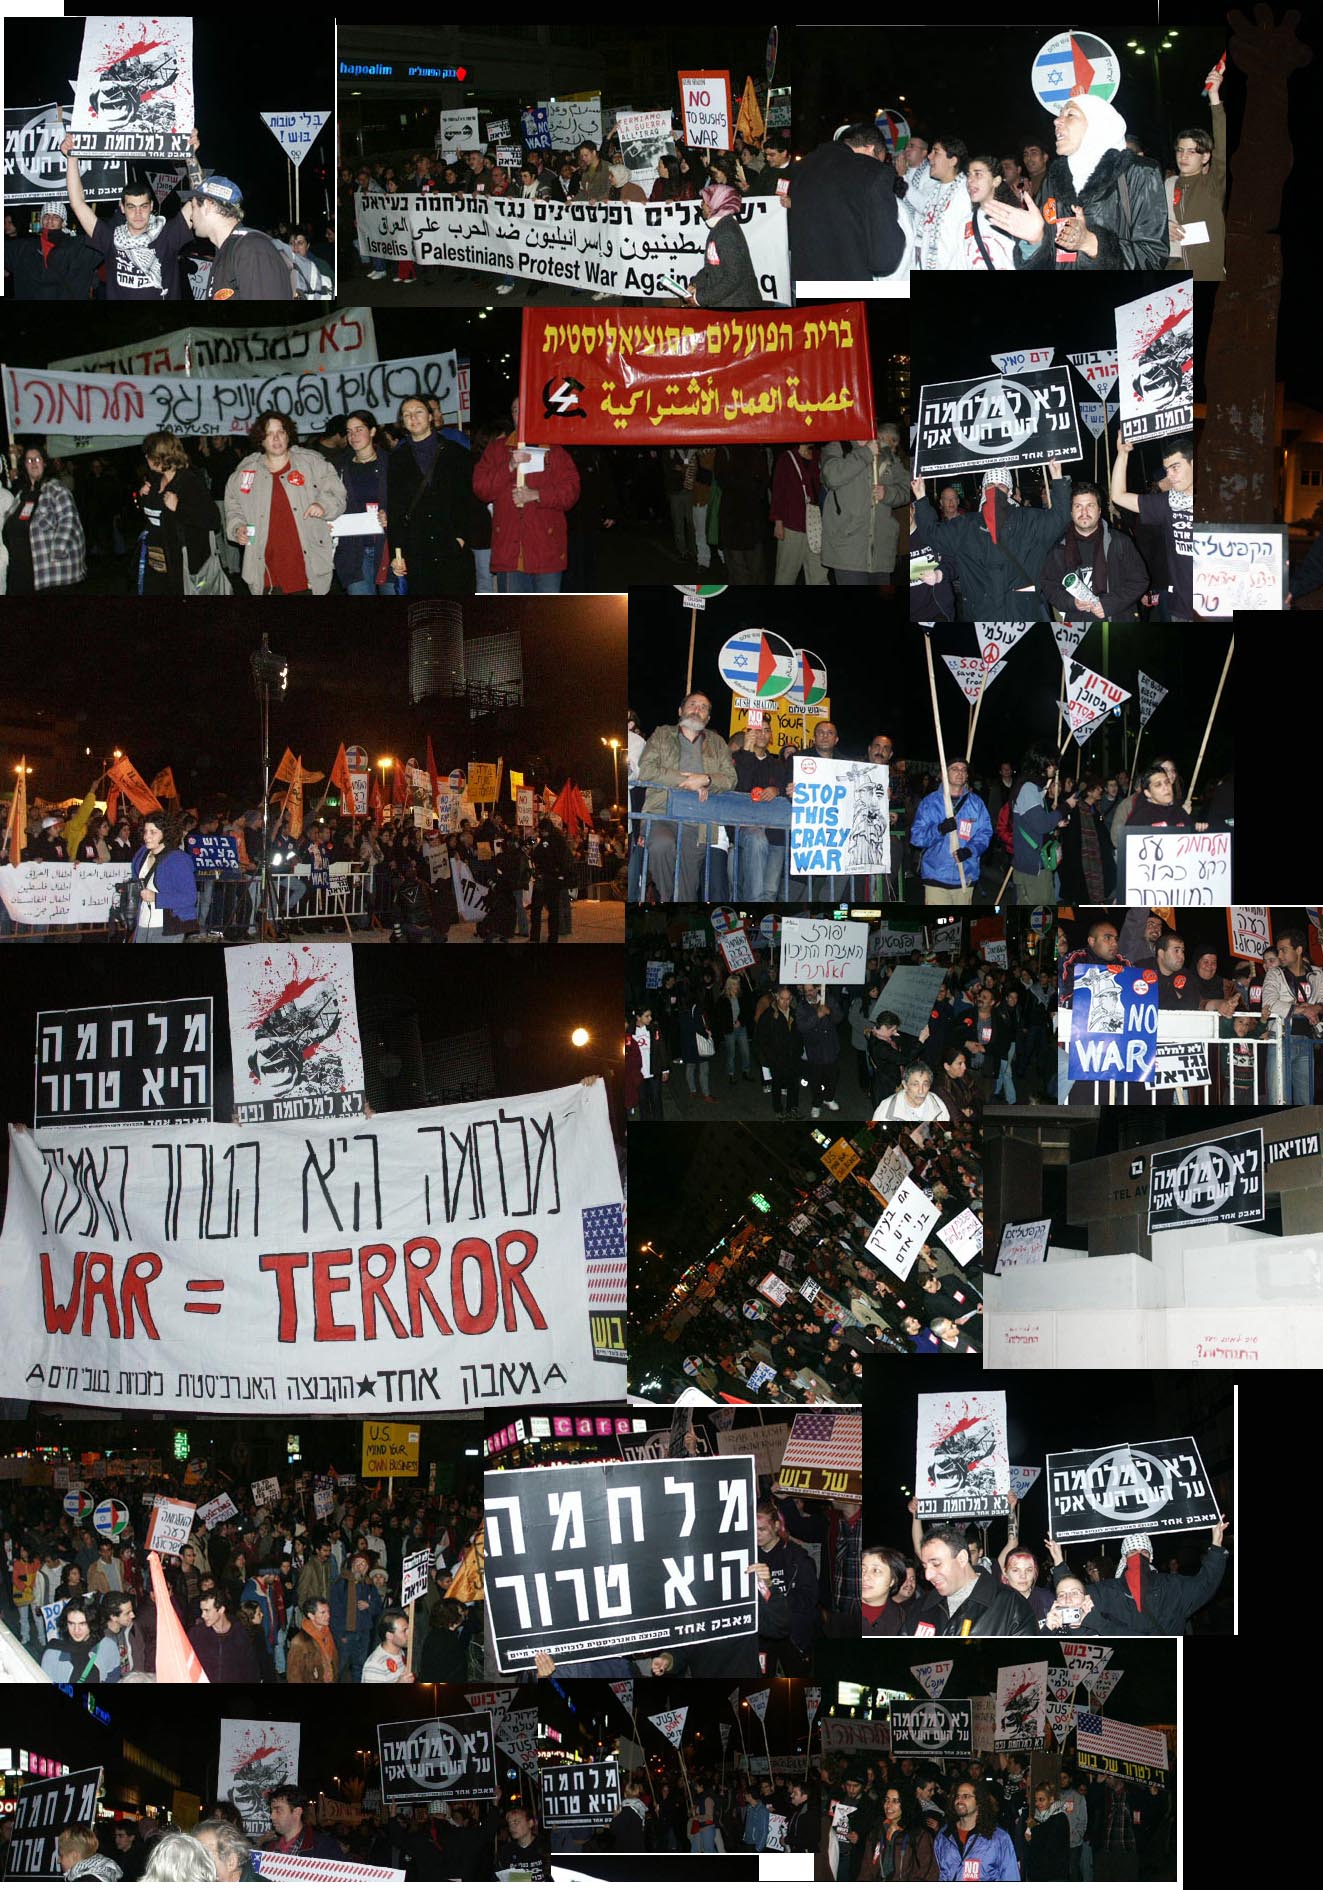 Rally against the War on Iraq in Tel Aviv